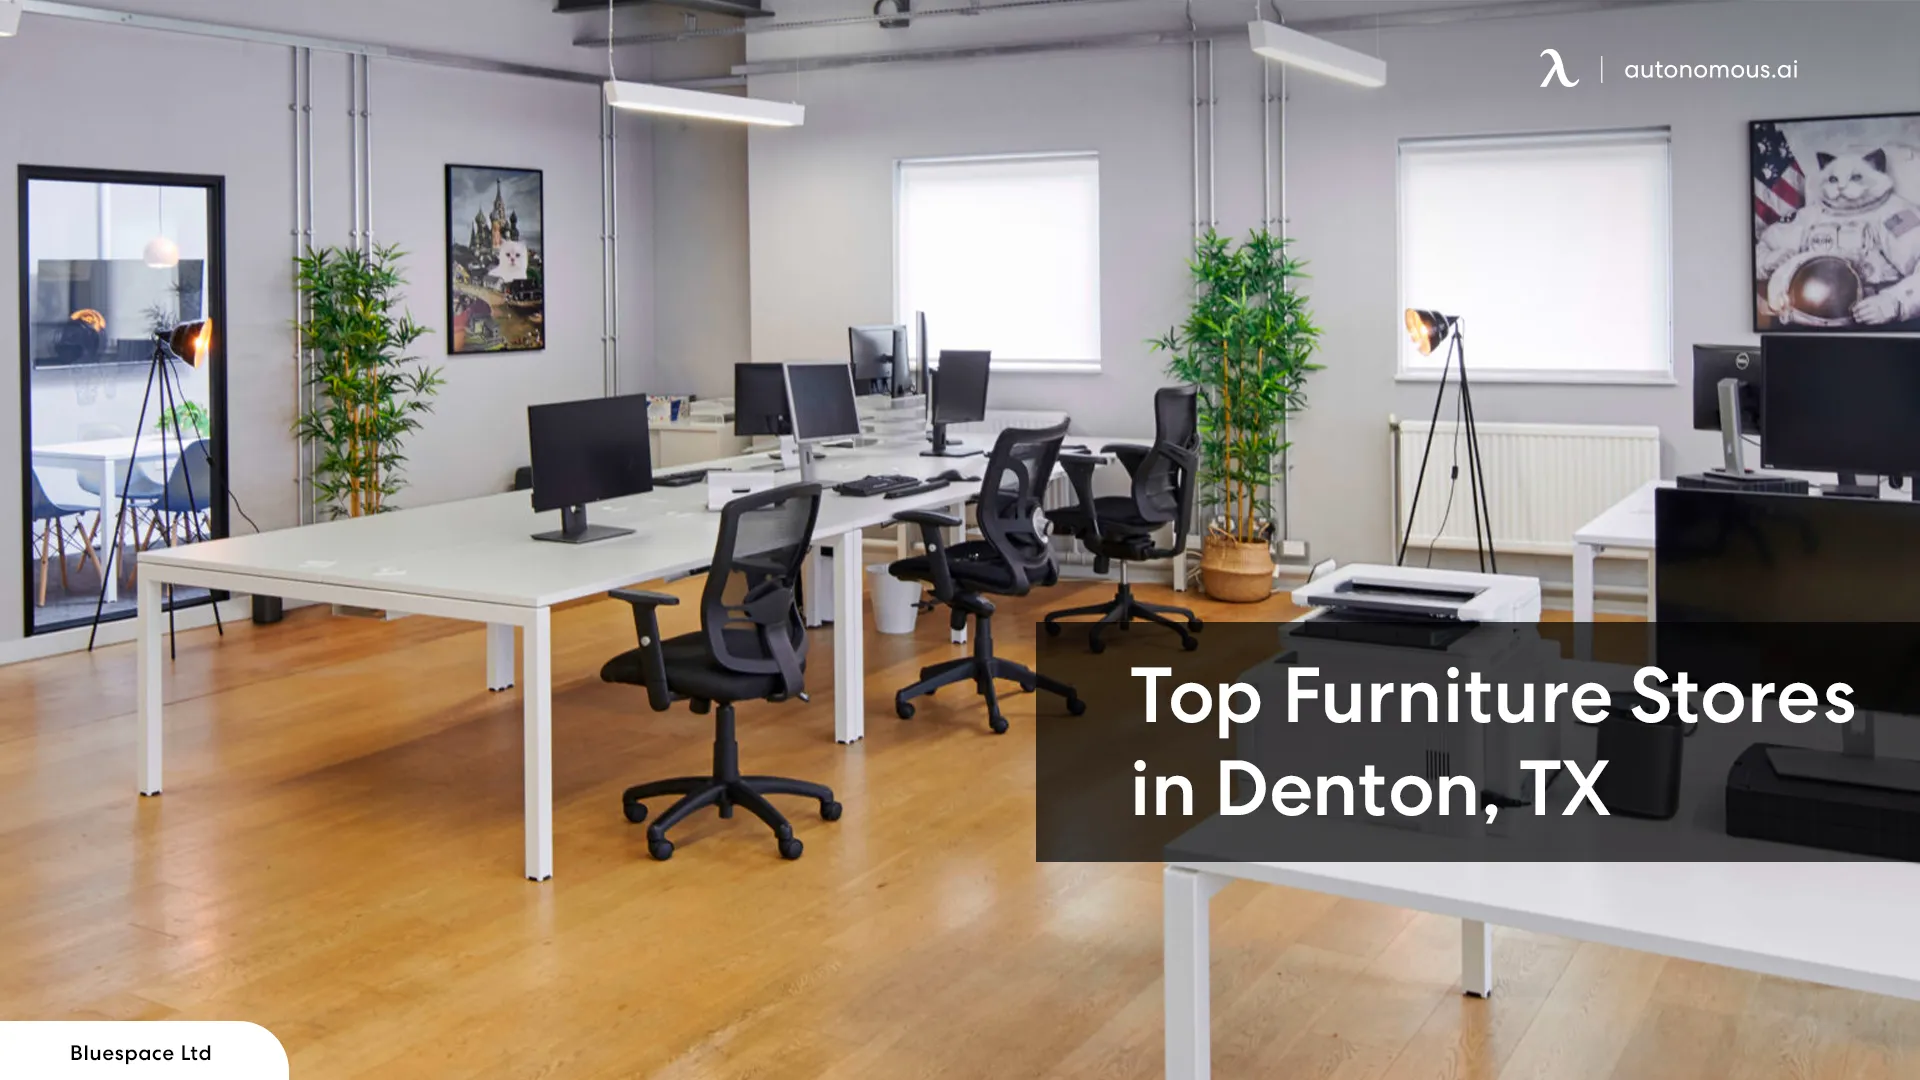 The Best Furniture Stores in Denton TX for Stylish Home & Office Decor